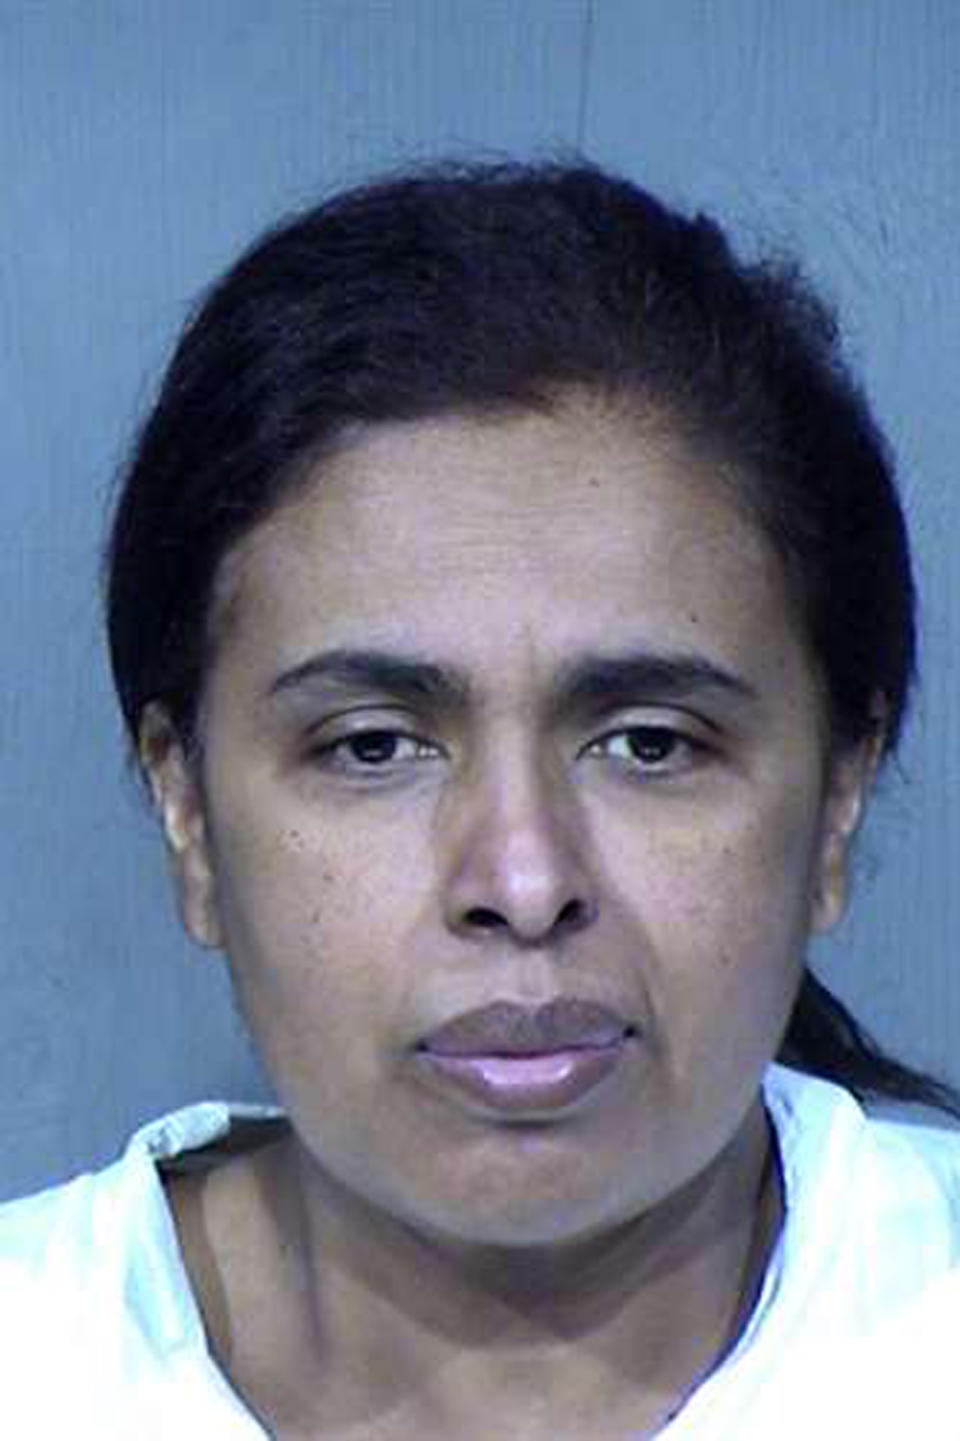 This undated booking photo provided by the Maricopa County Sheriff's Office shows 50-year-old Maribel Loera. Loera and her husband, 56-year-old Rafael Loera, are accused of intentionally setting their west Phoenix home ablaze after their children were taken by the state, leading firefighters to find unidentified skeletal remains. They have been booked on suspicion of arson, child abuse and concealment of a dead body. Authorities haven't determined whether the remains belong to a child or adult. (Maricopa County Sheriff's Office via AP)